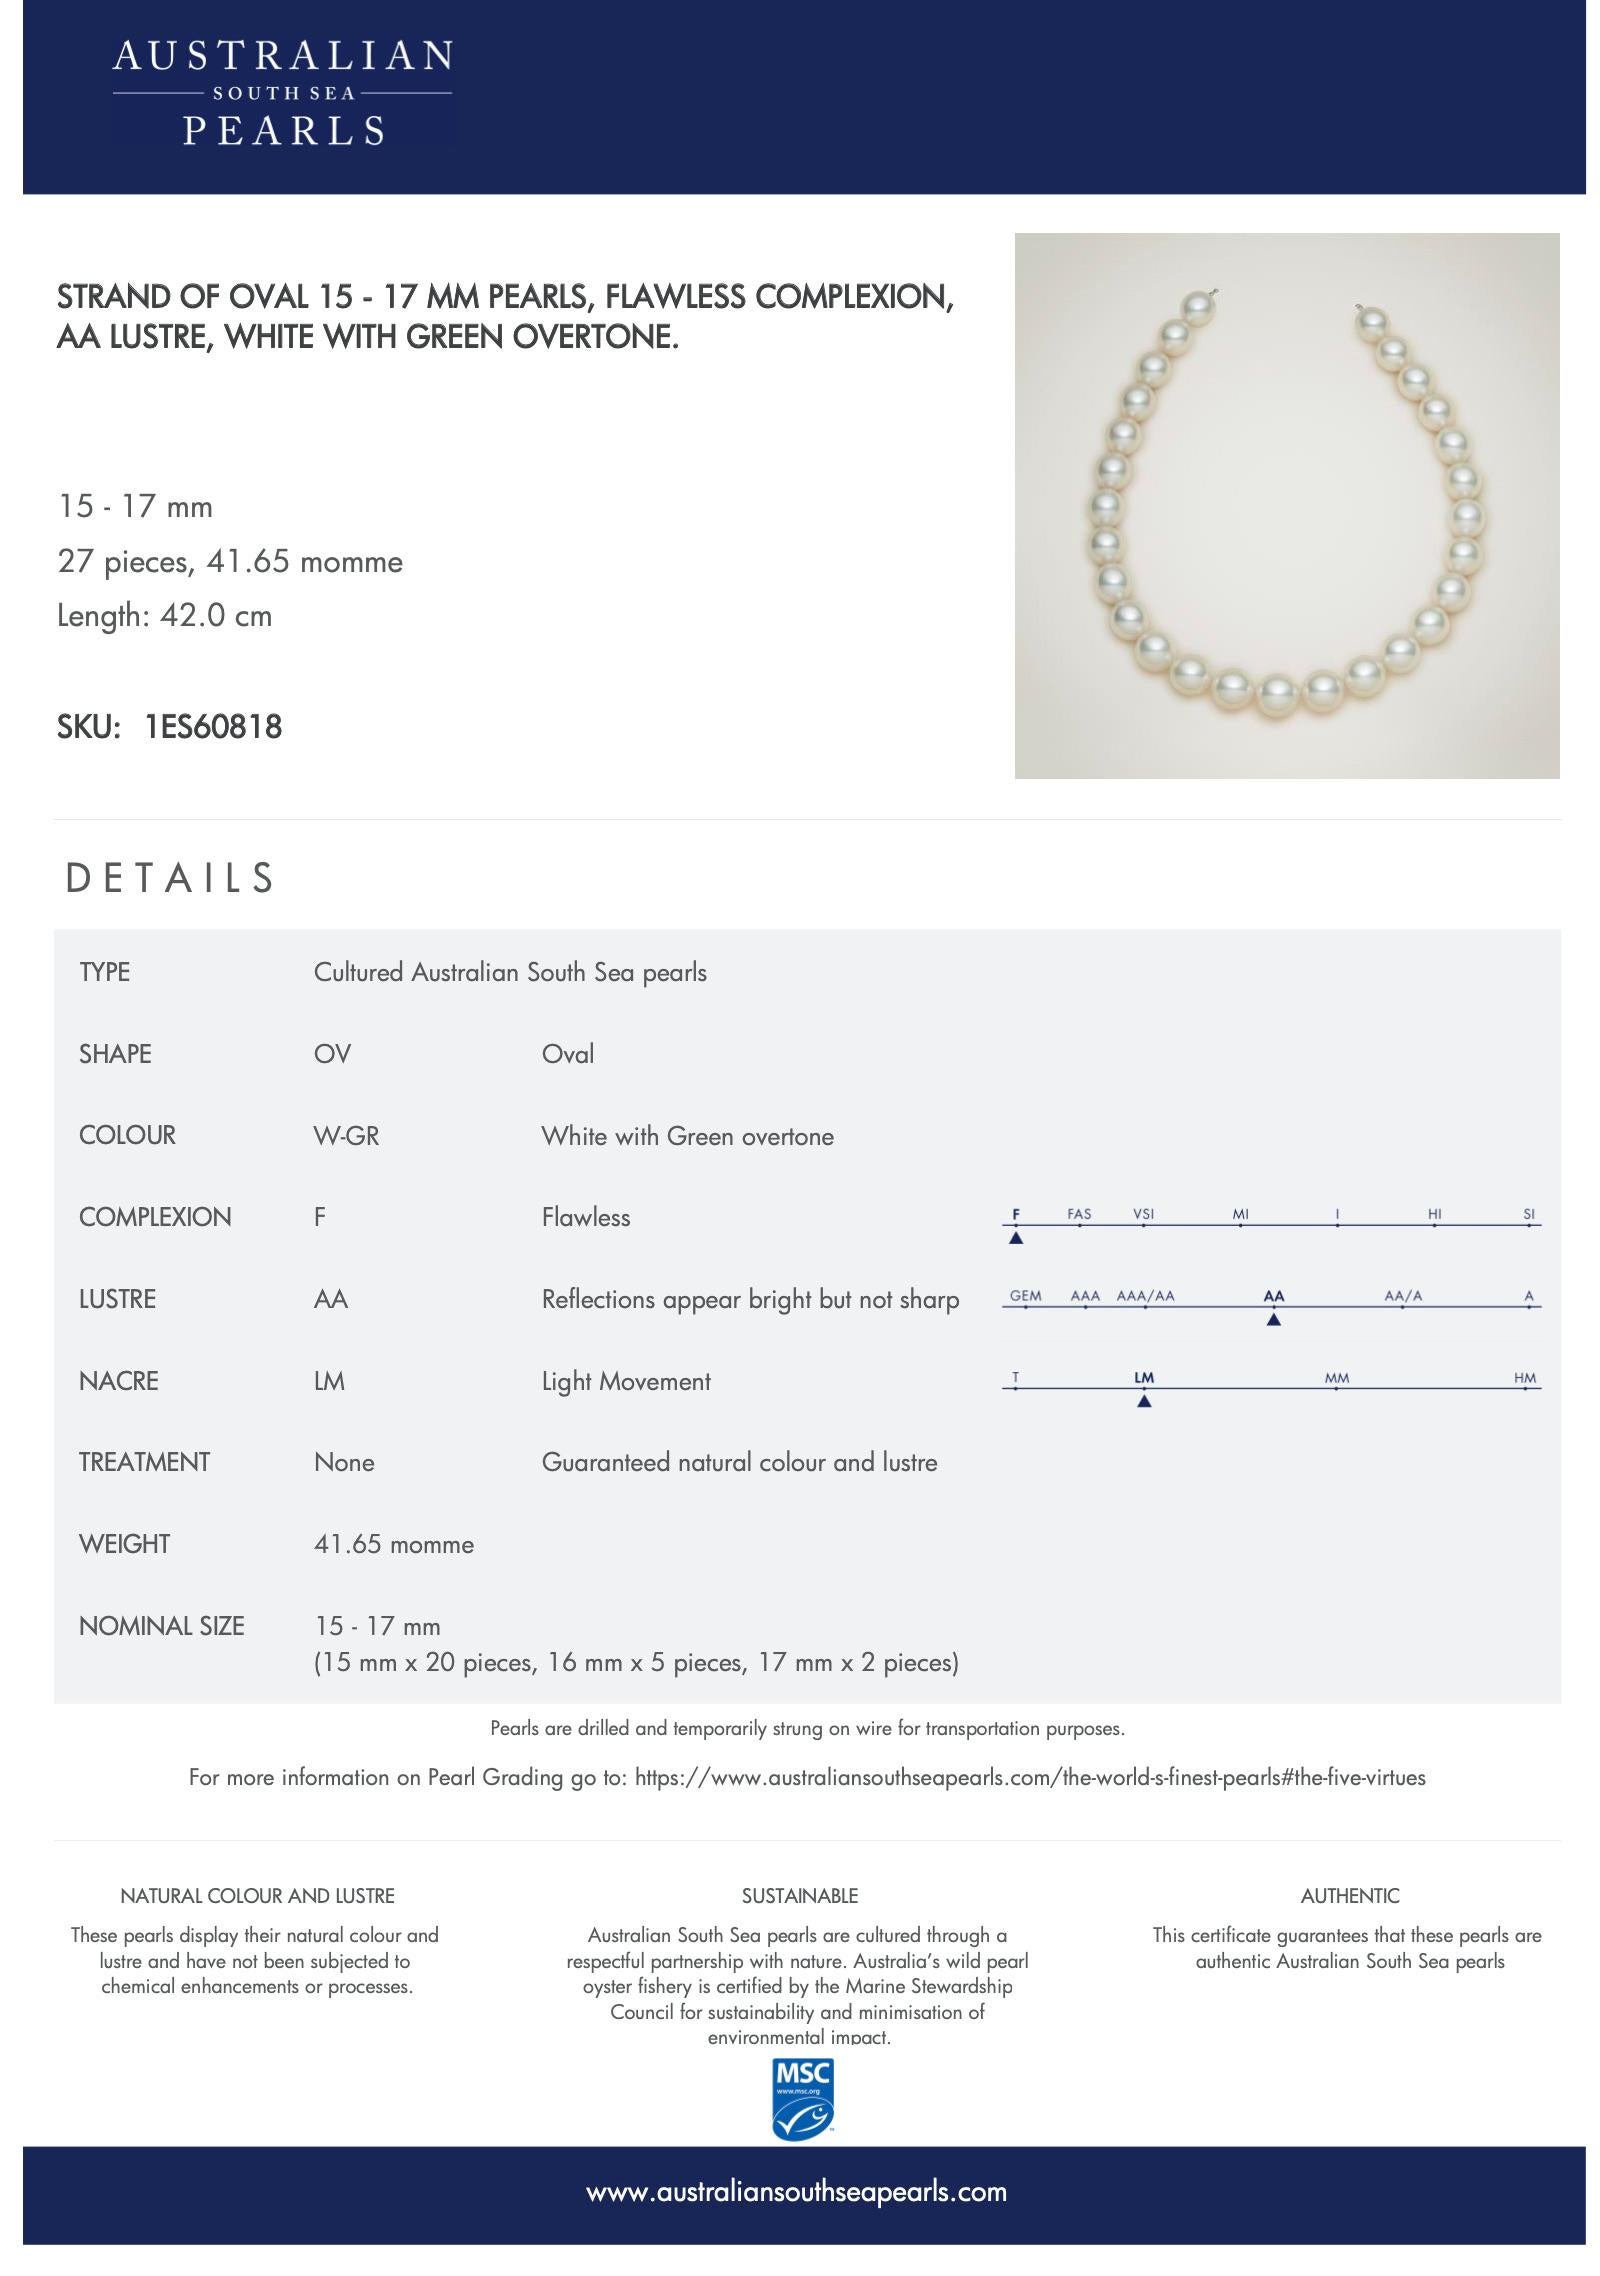 
Shape: Oval
Complexion: Flawless
Nacre: Tight
Lustre: AAA/AA
Colour: White / Green overtone
Type: Cultured Australian South Sea pearls
Size: 15 - 17 mm
Pieces: 27
Momme: 41.65

GUARANTEED NATURAL COLOUR AND LUSTRE

These pearls display their